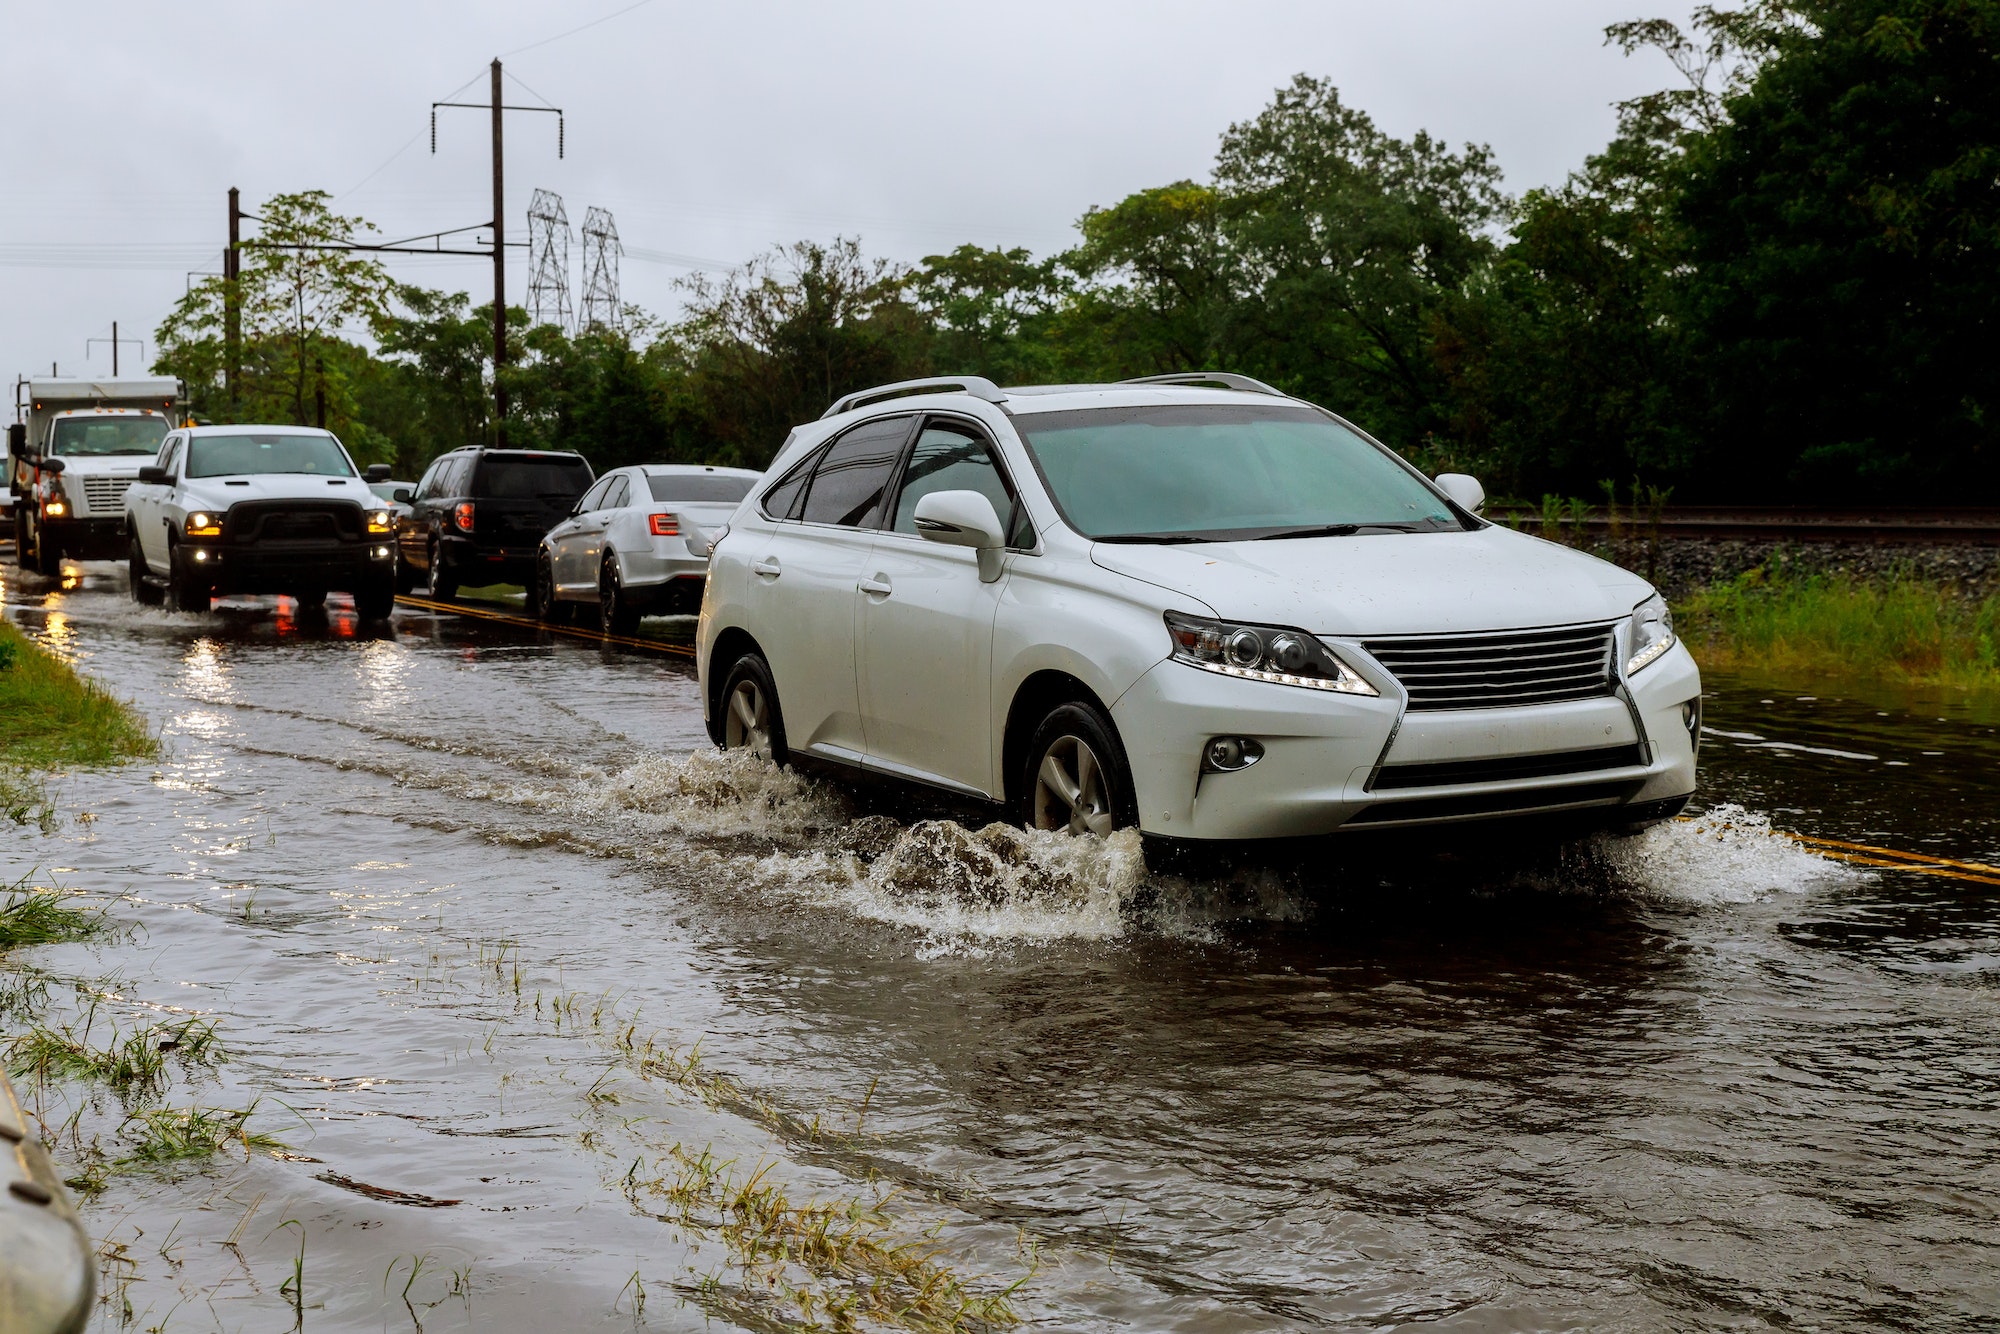 Cars driving on a flooded road during a by heavy rain,